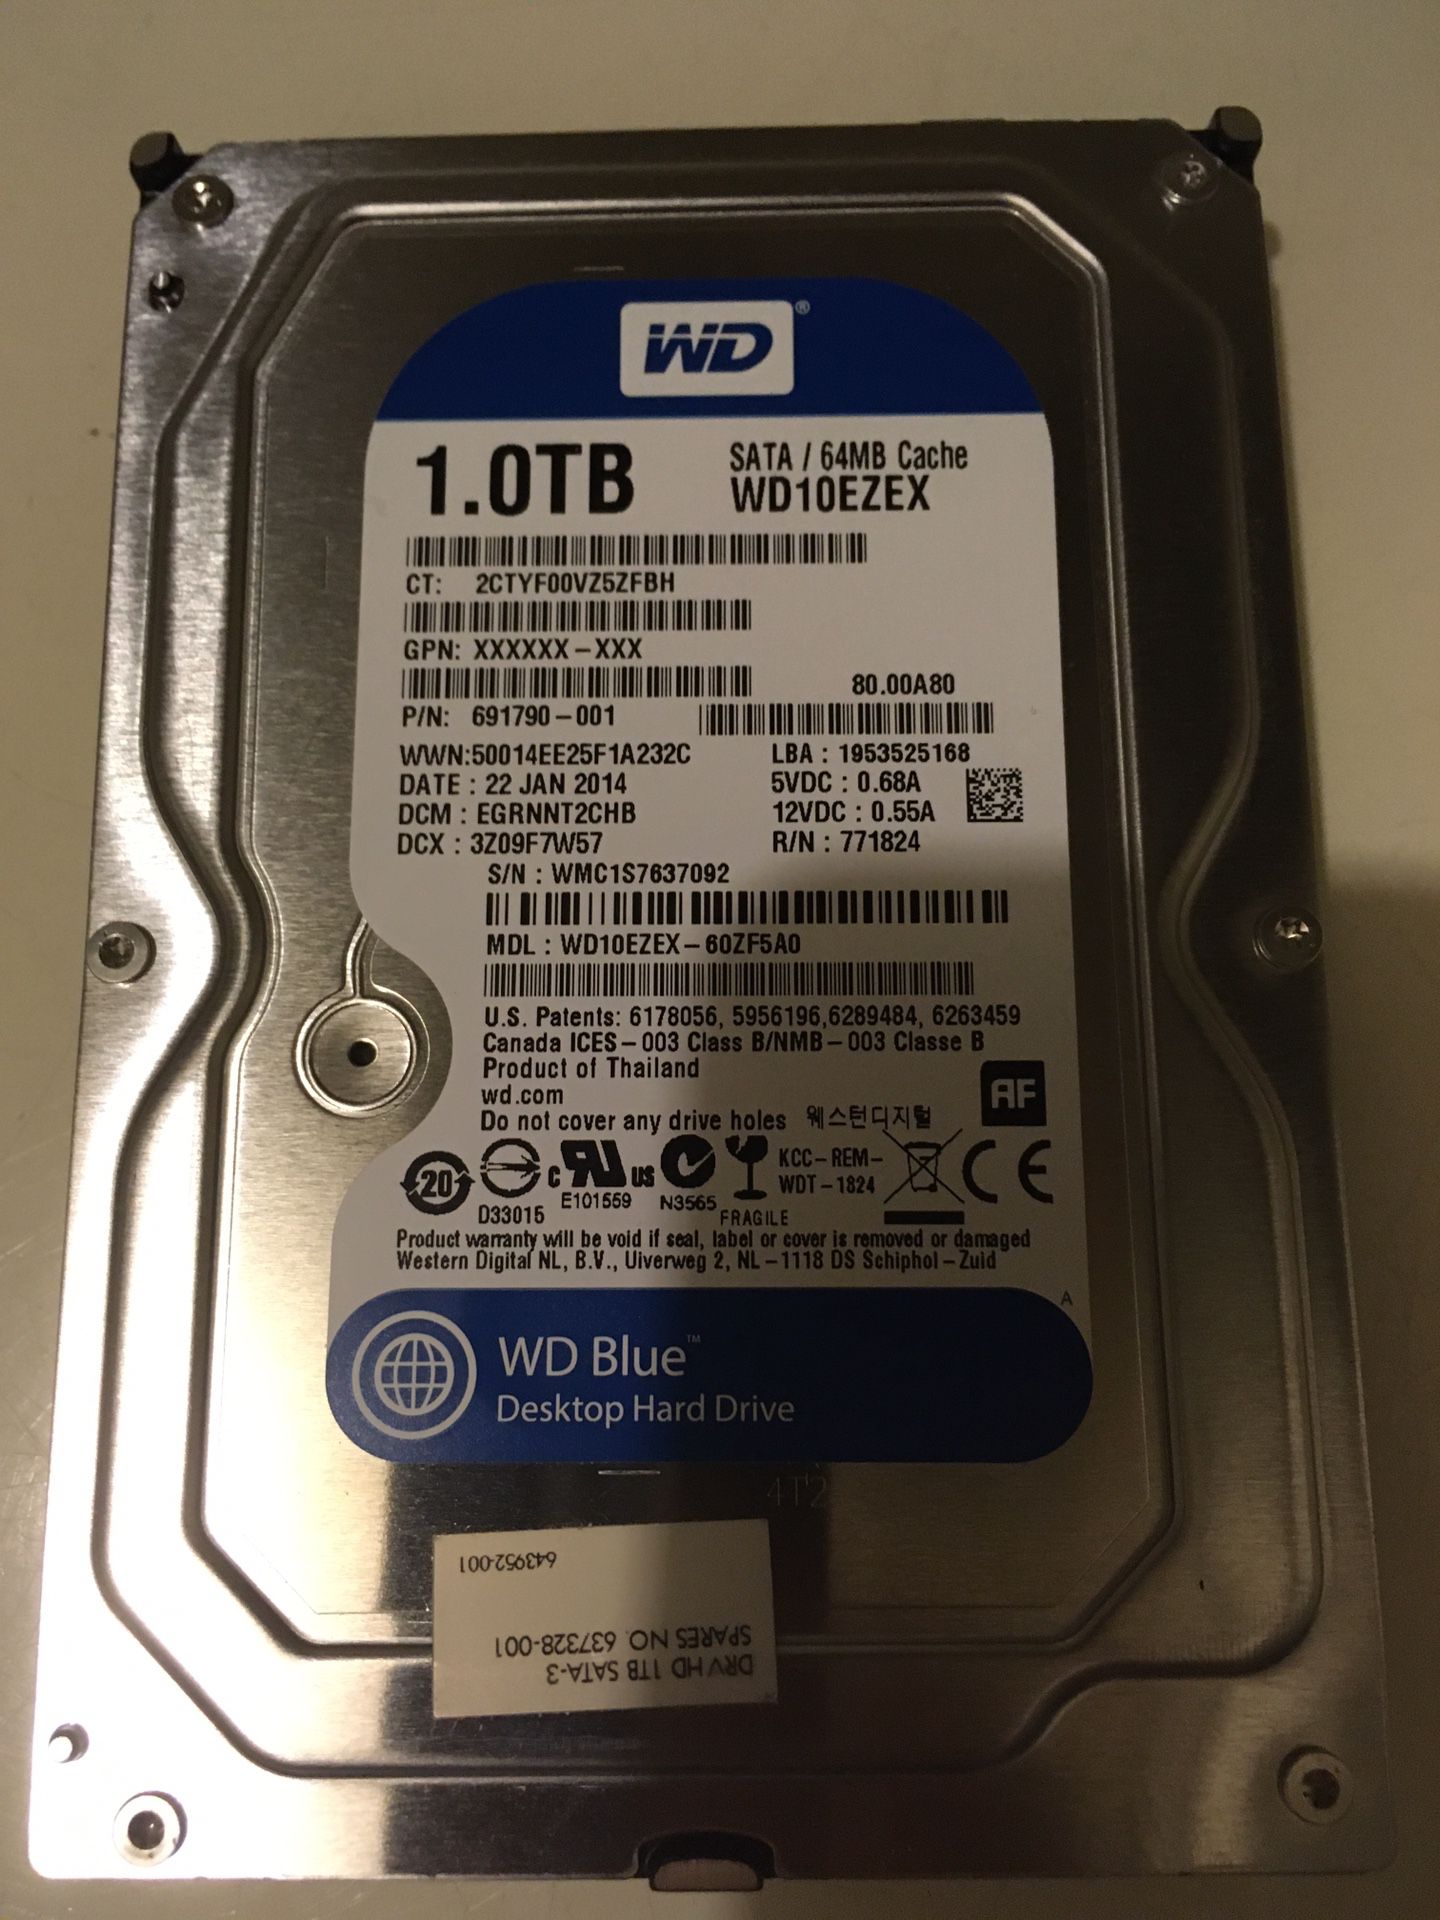 Hard disk 1 Tb low hours use, HDD 1tb